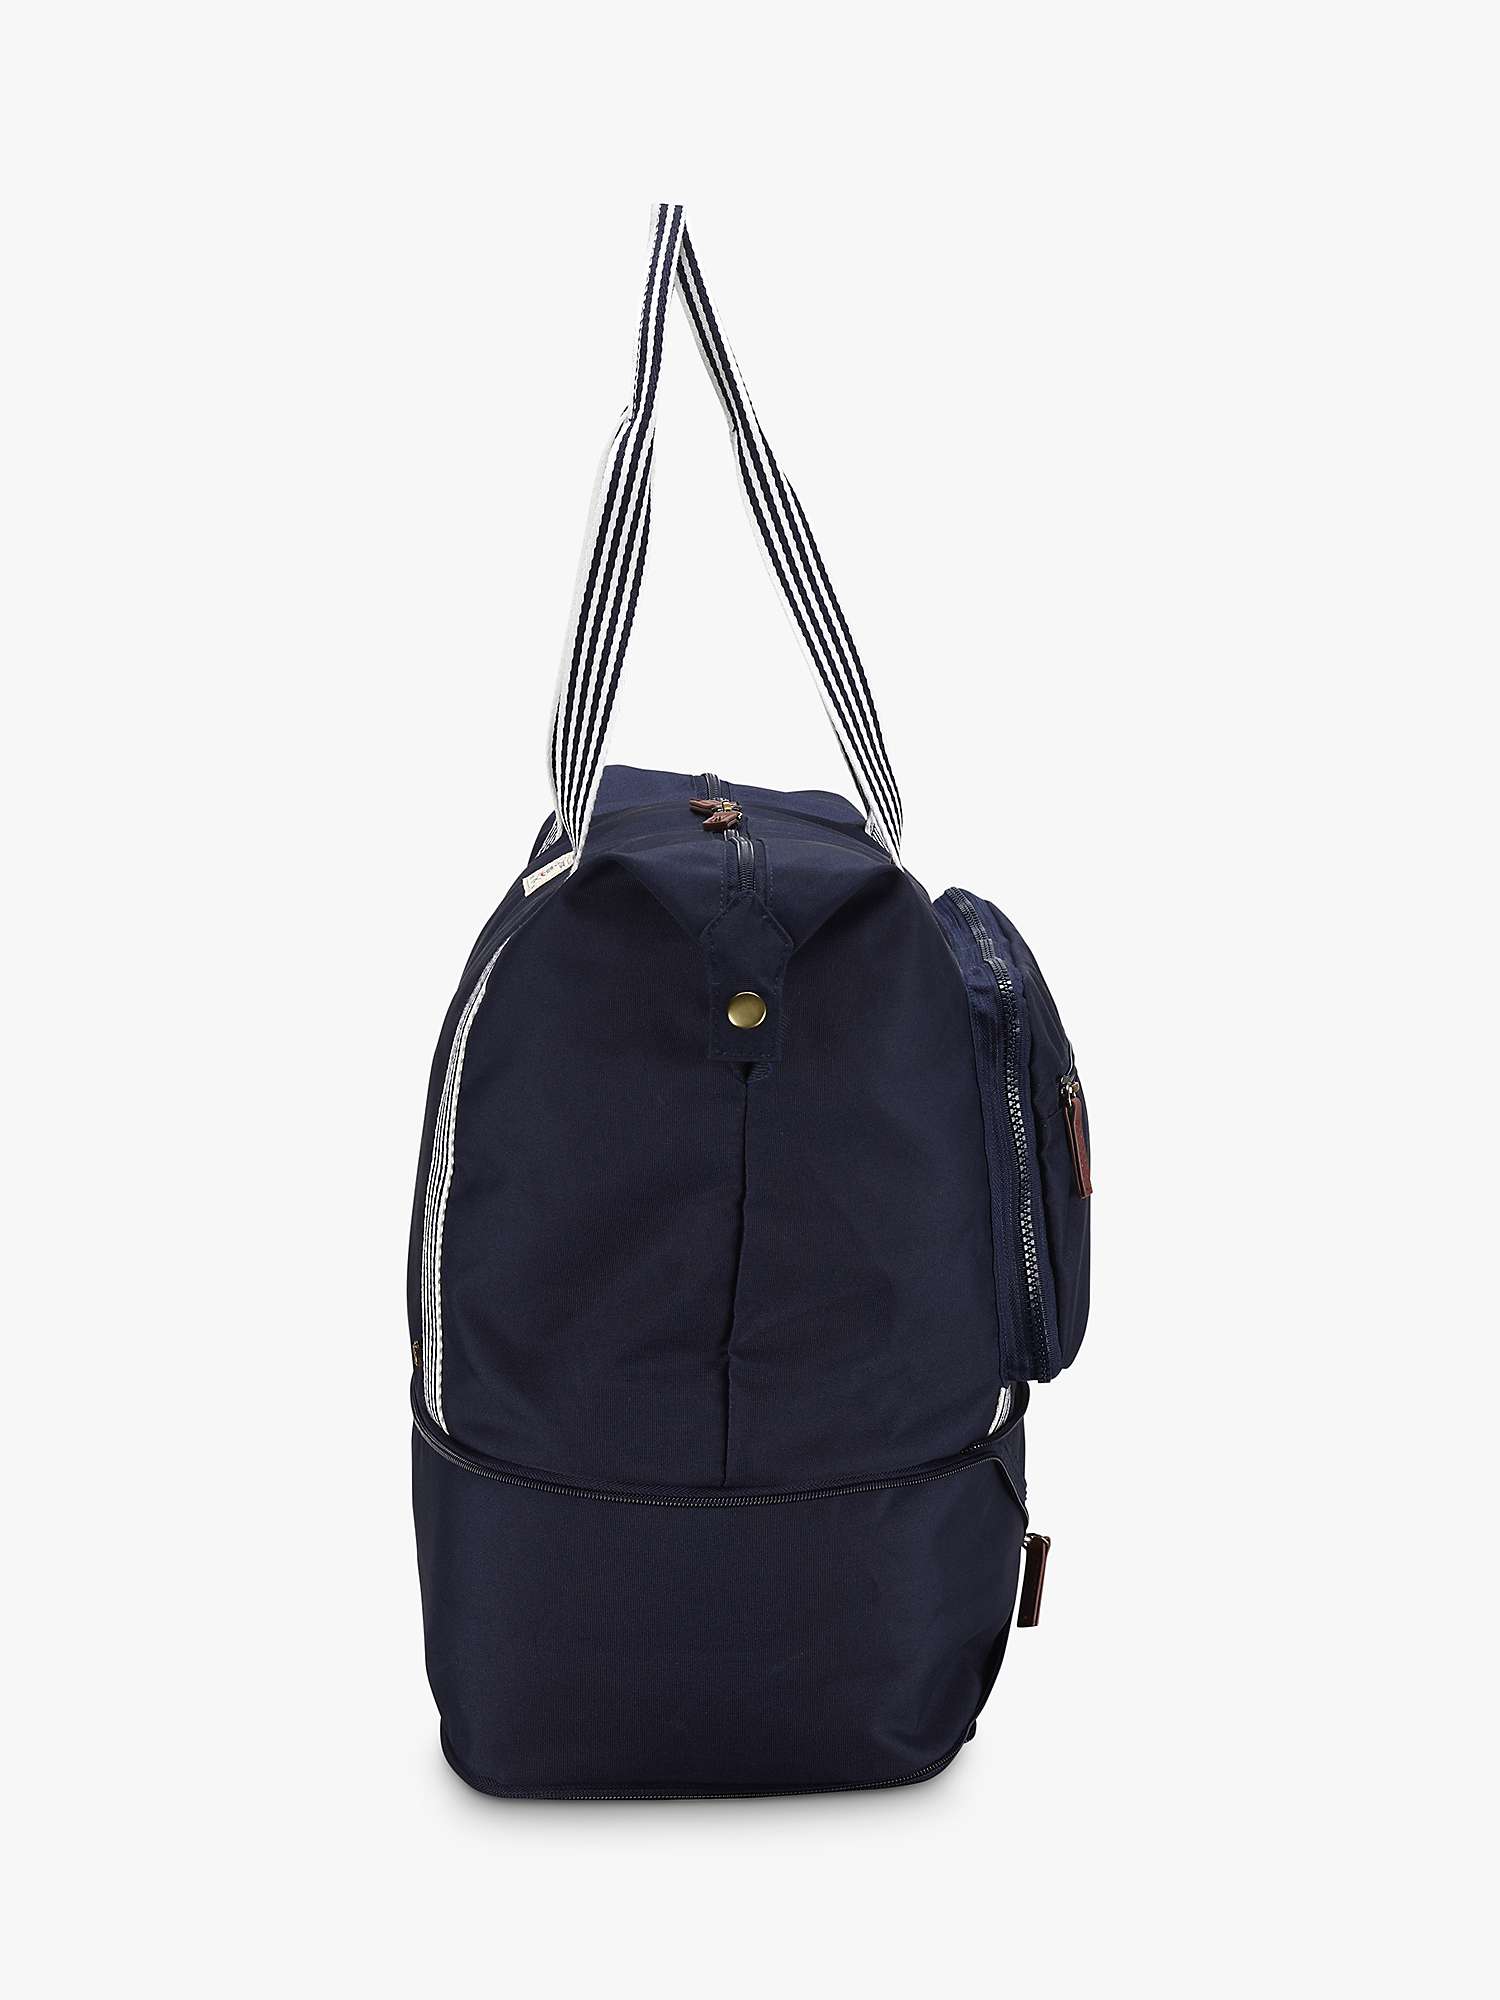 Buy Joules Coast Collection Packaway Duffle Bag Online at johnlewis.com